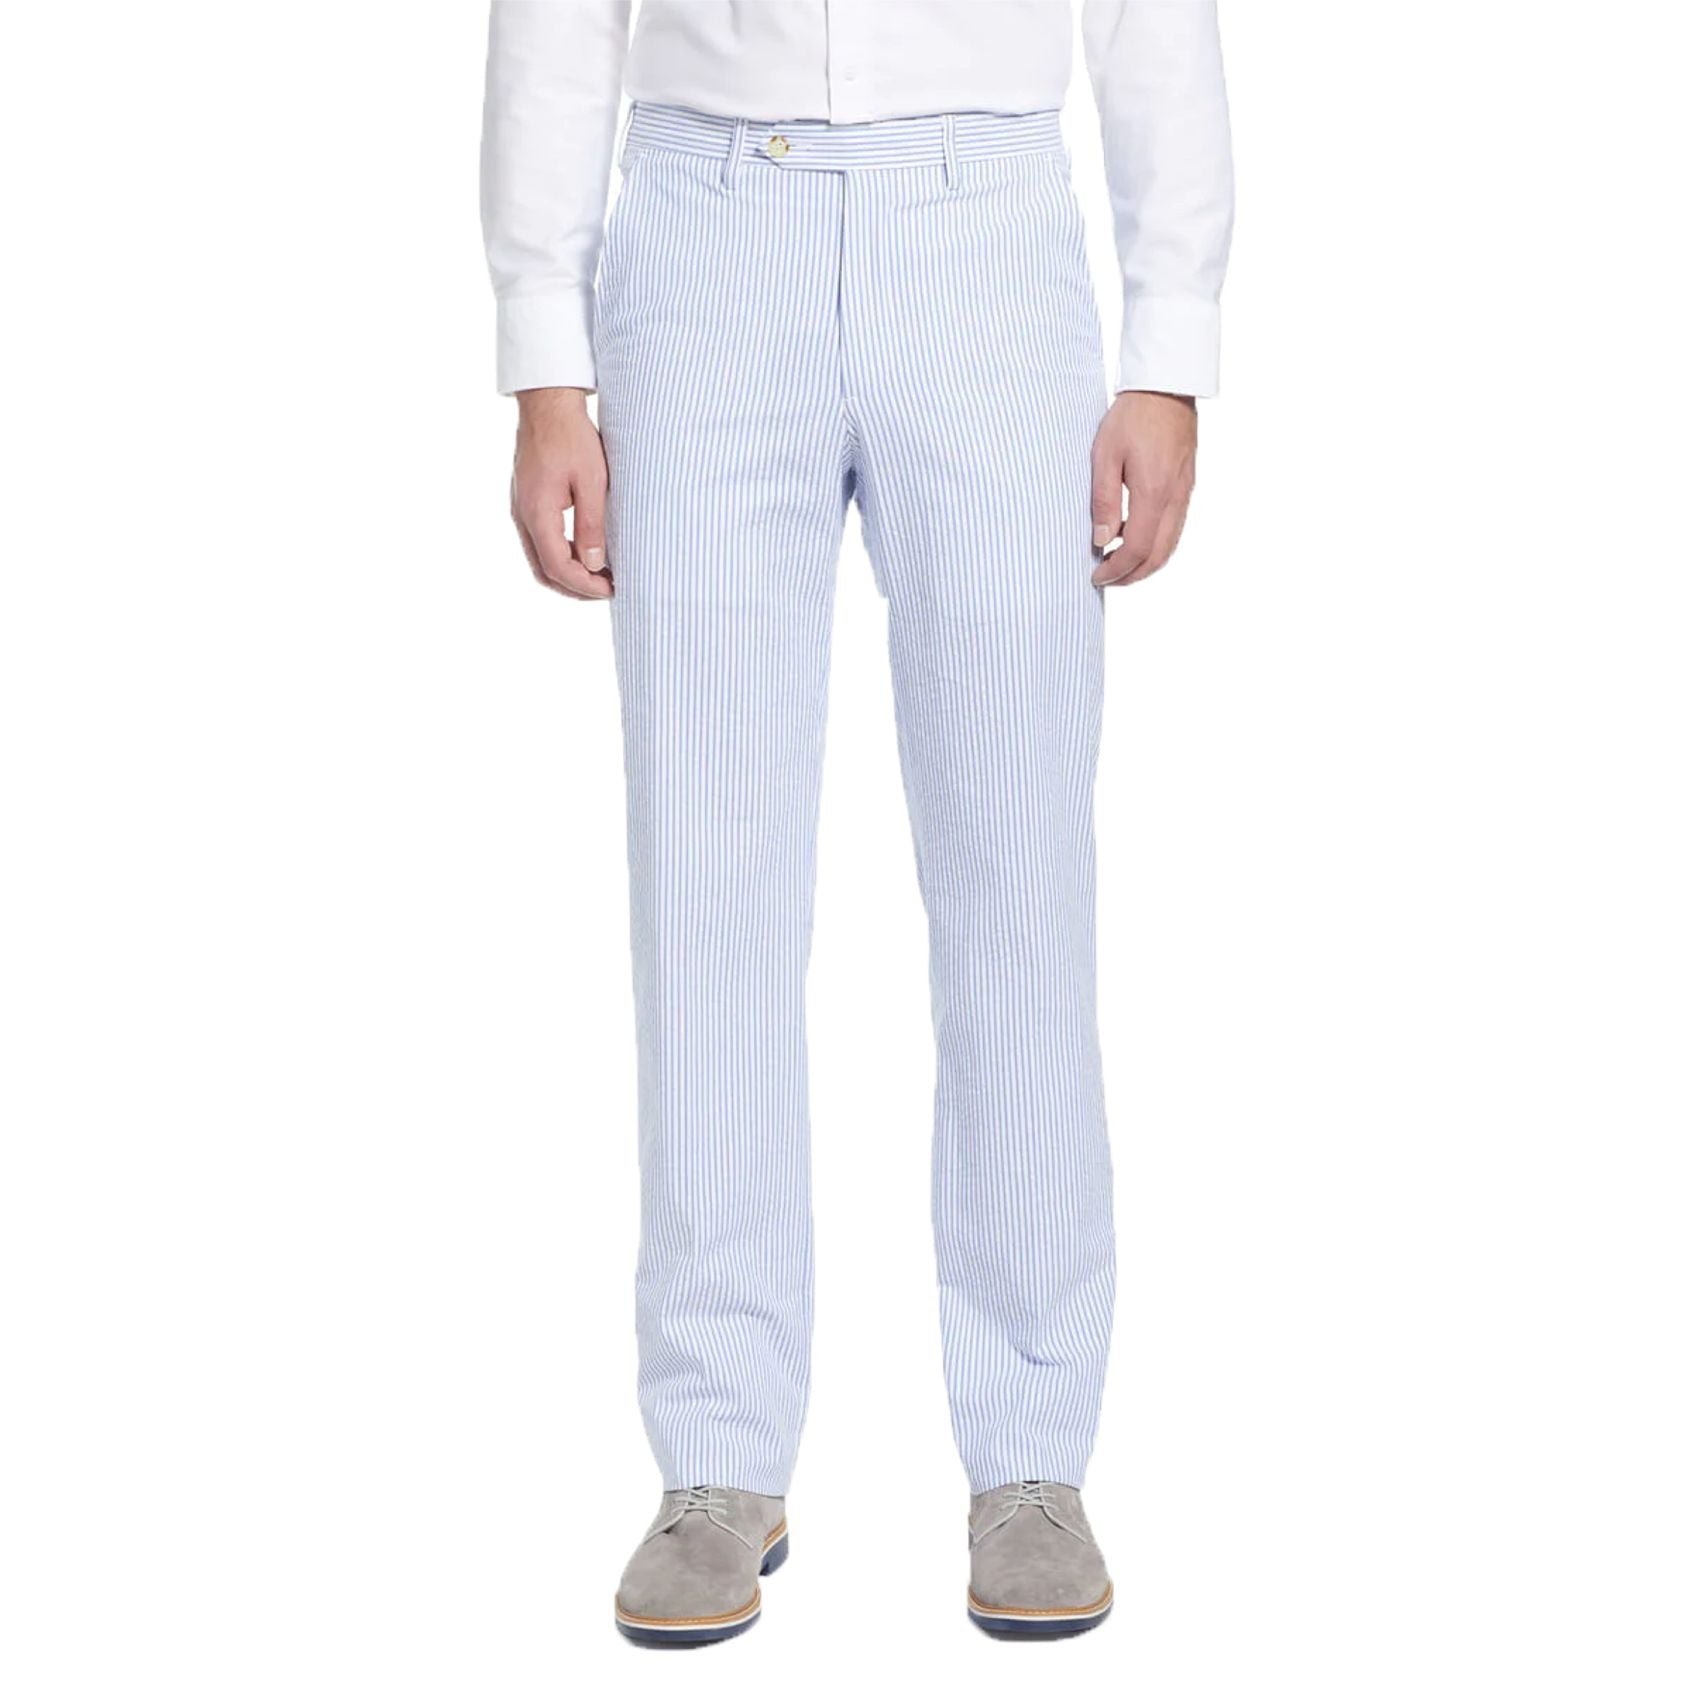 Seersucker Cotton Pant in Light Blue and White (Hampton Plain Front) by Berle